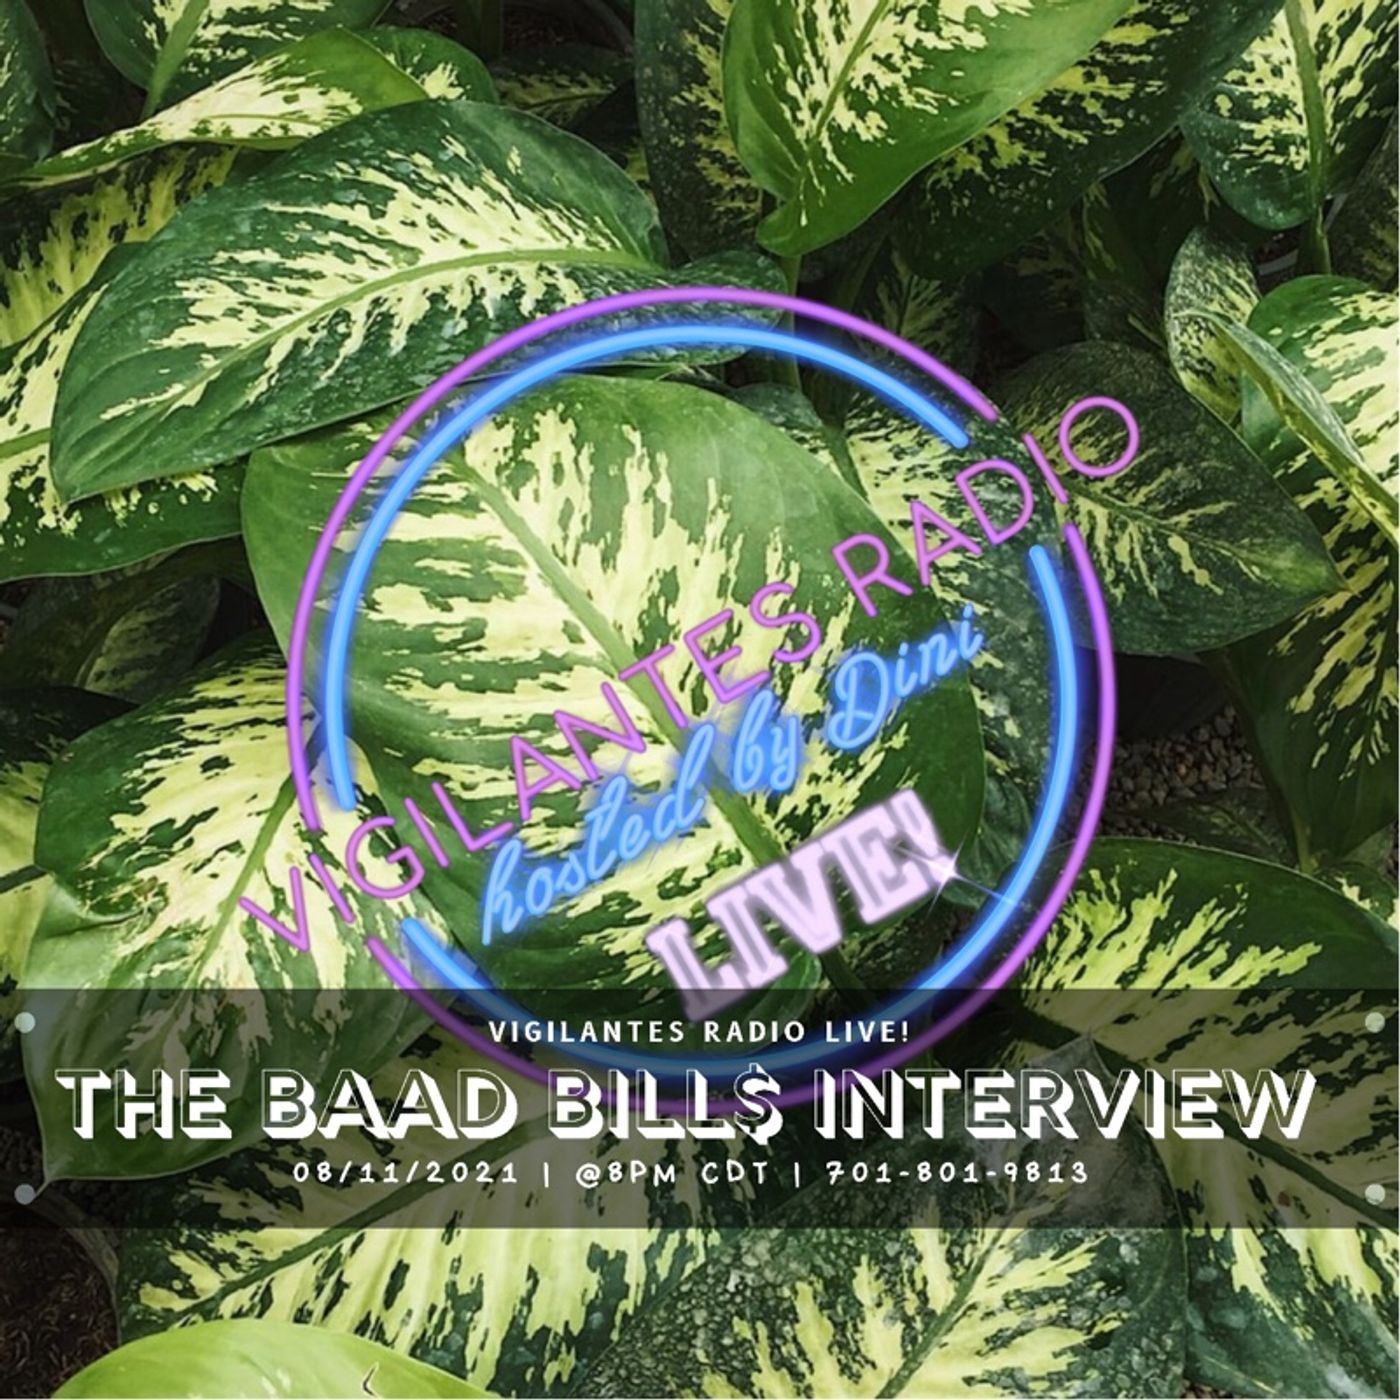 The Baad Bill$ Interview. Image